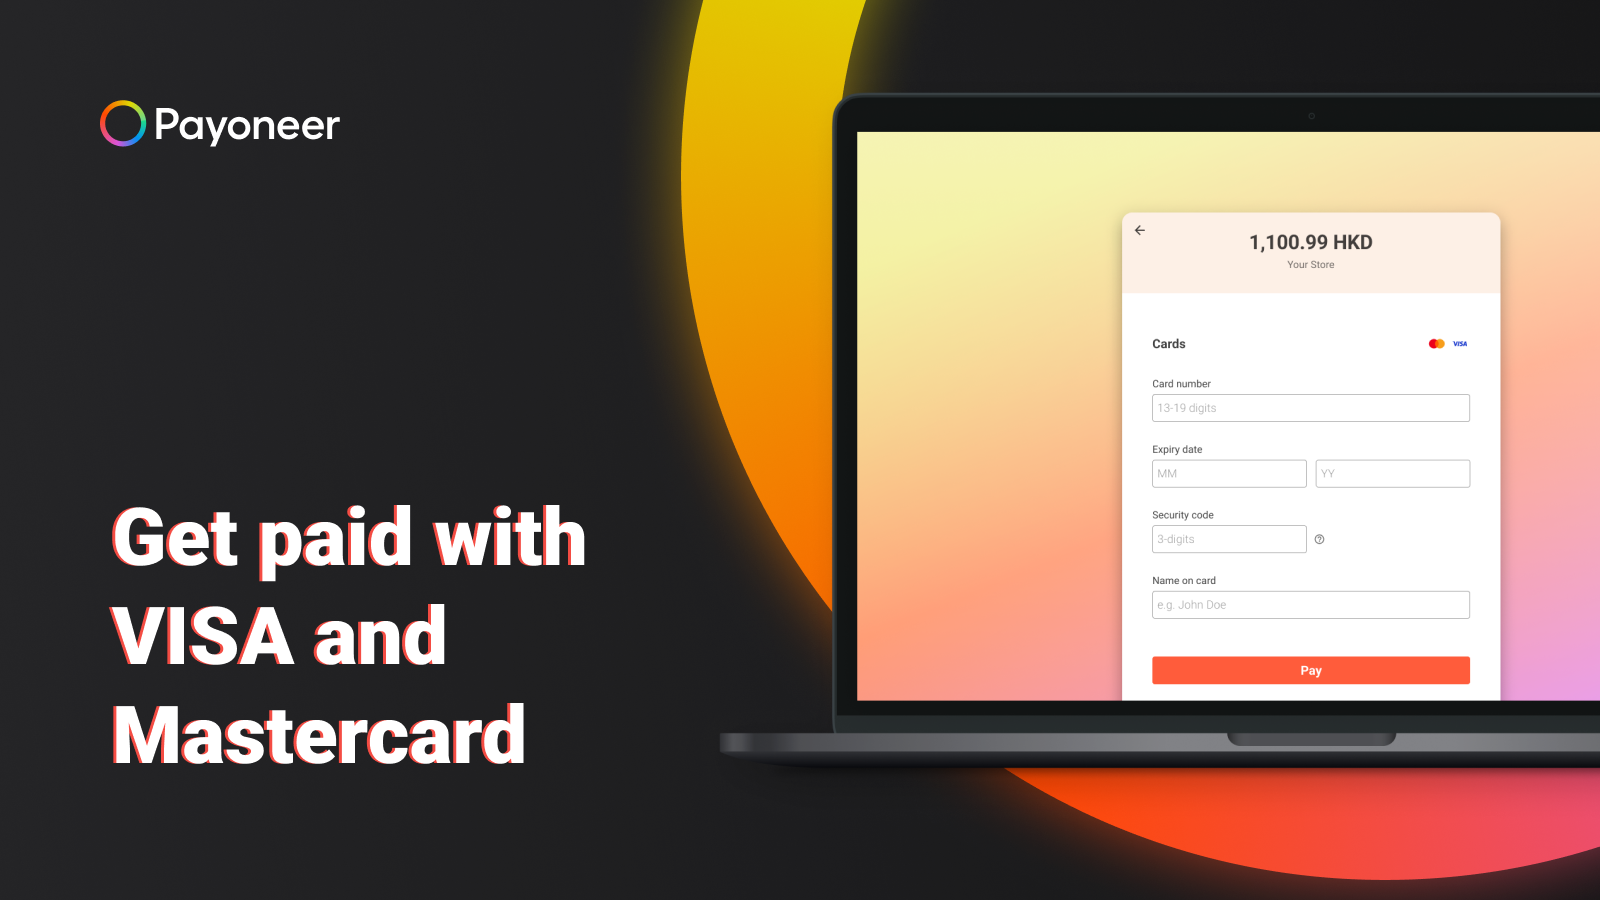 Get paid with VISA and Mastercard